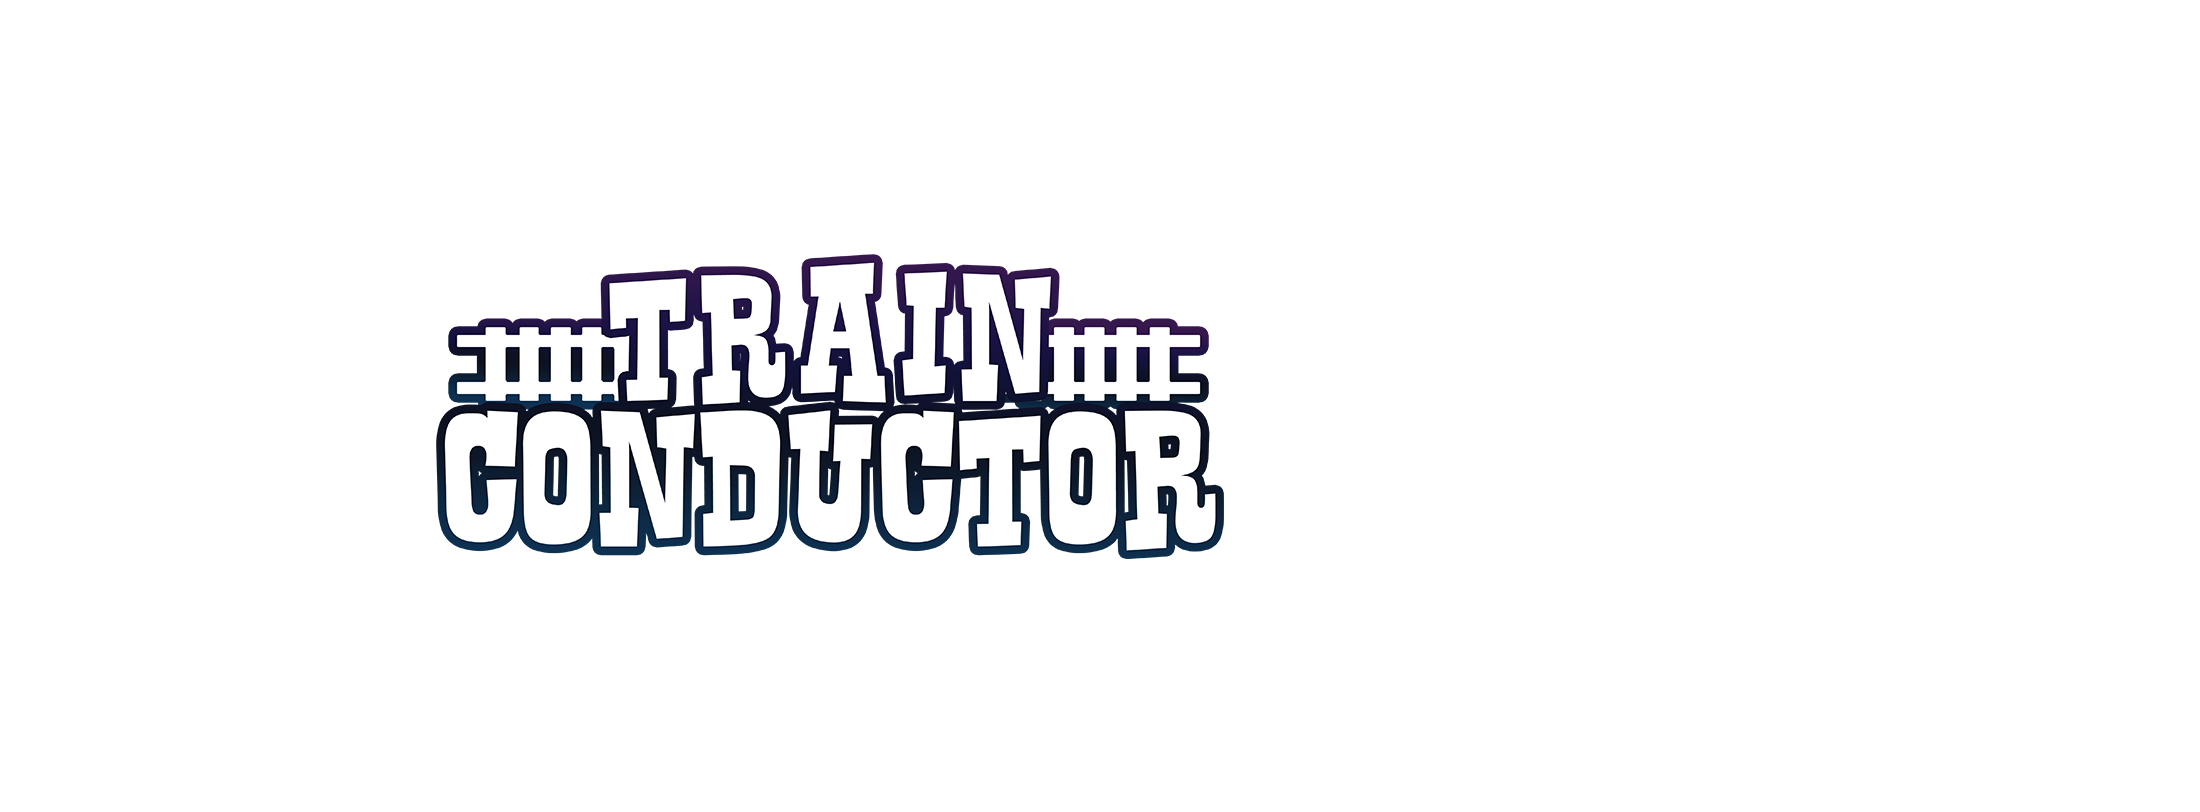 Train Conductor Australia banner image front layer